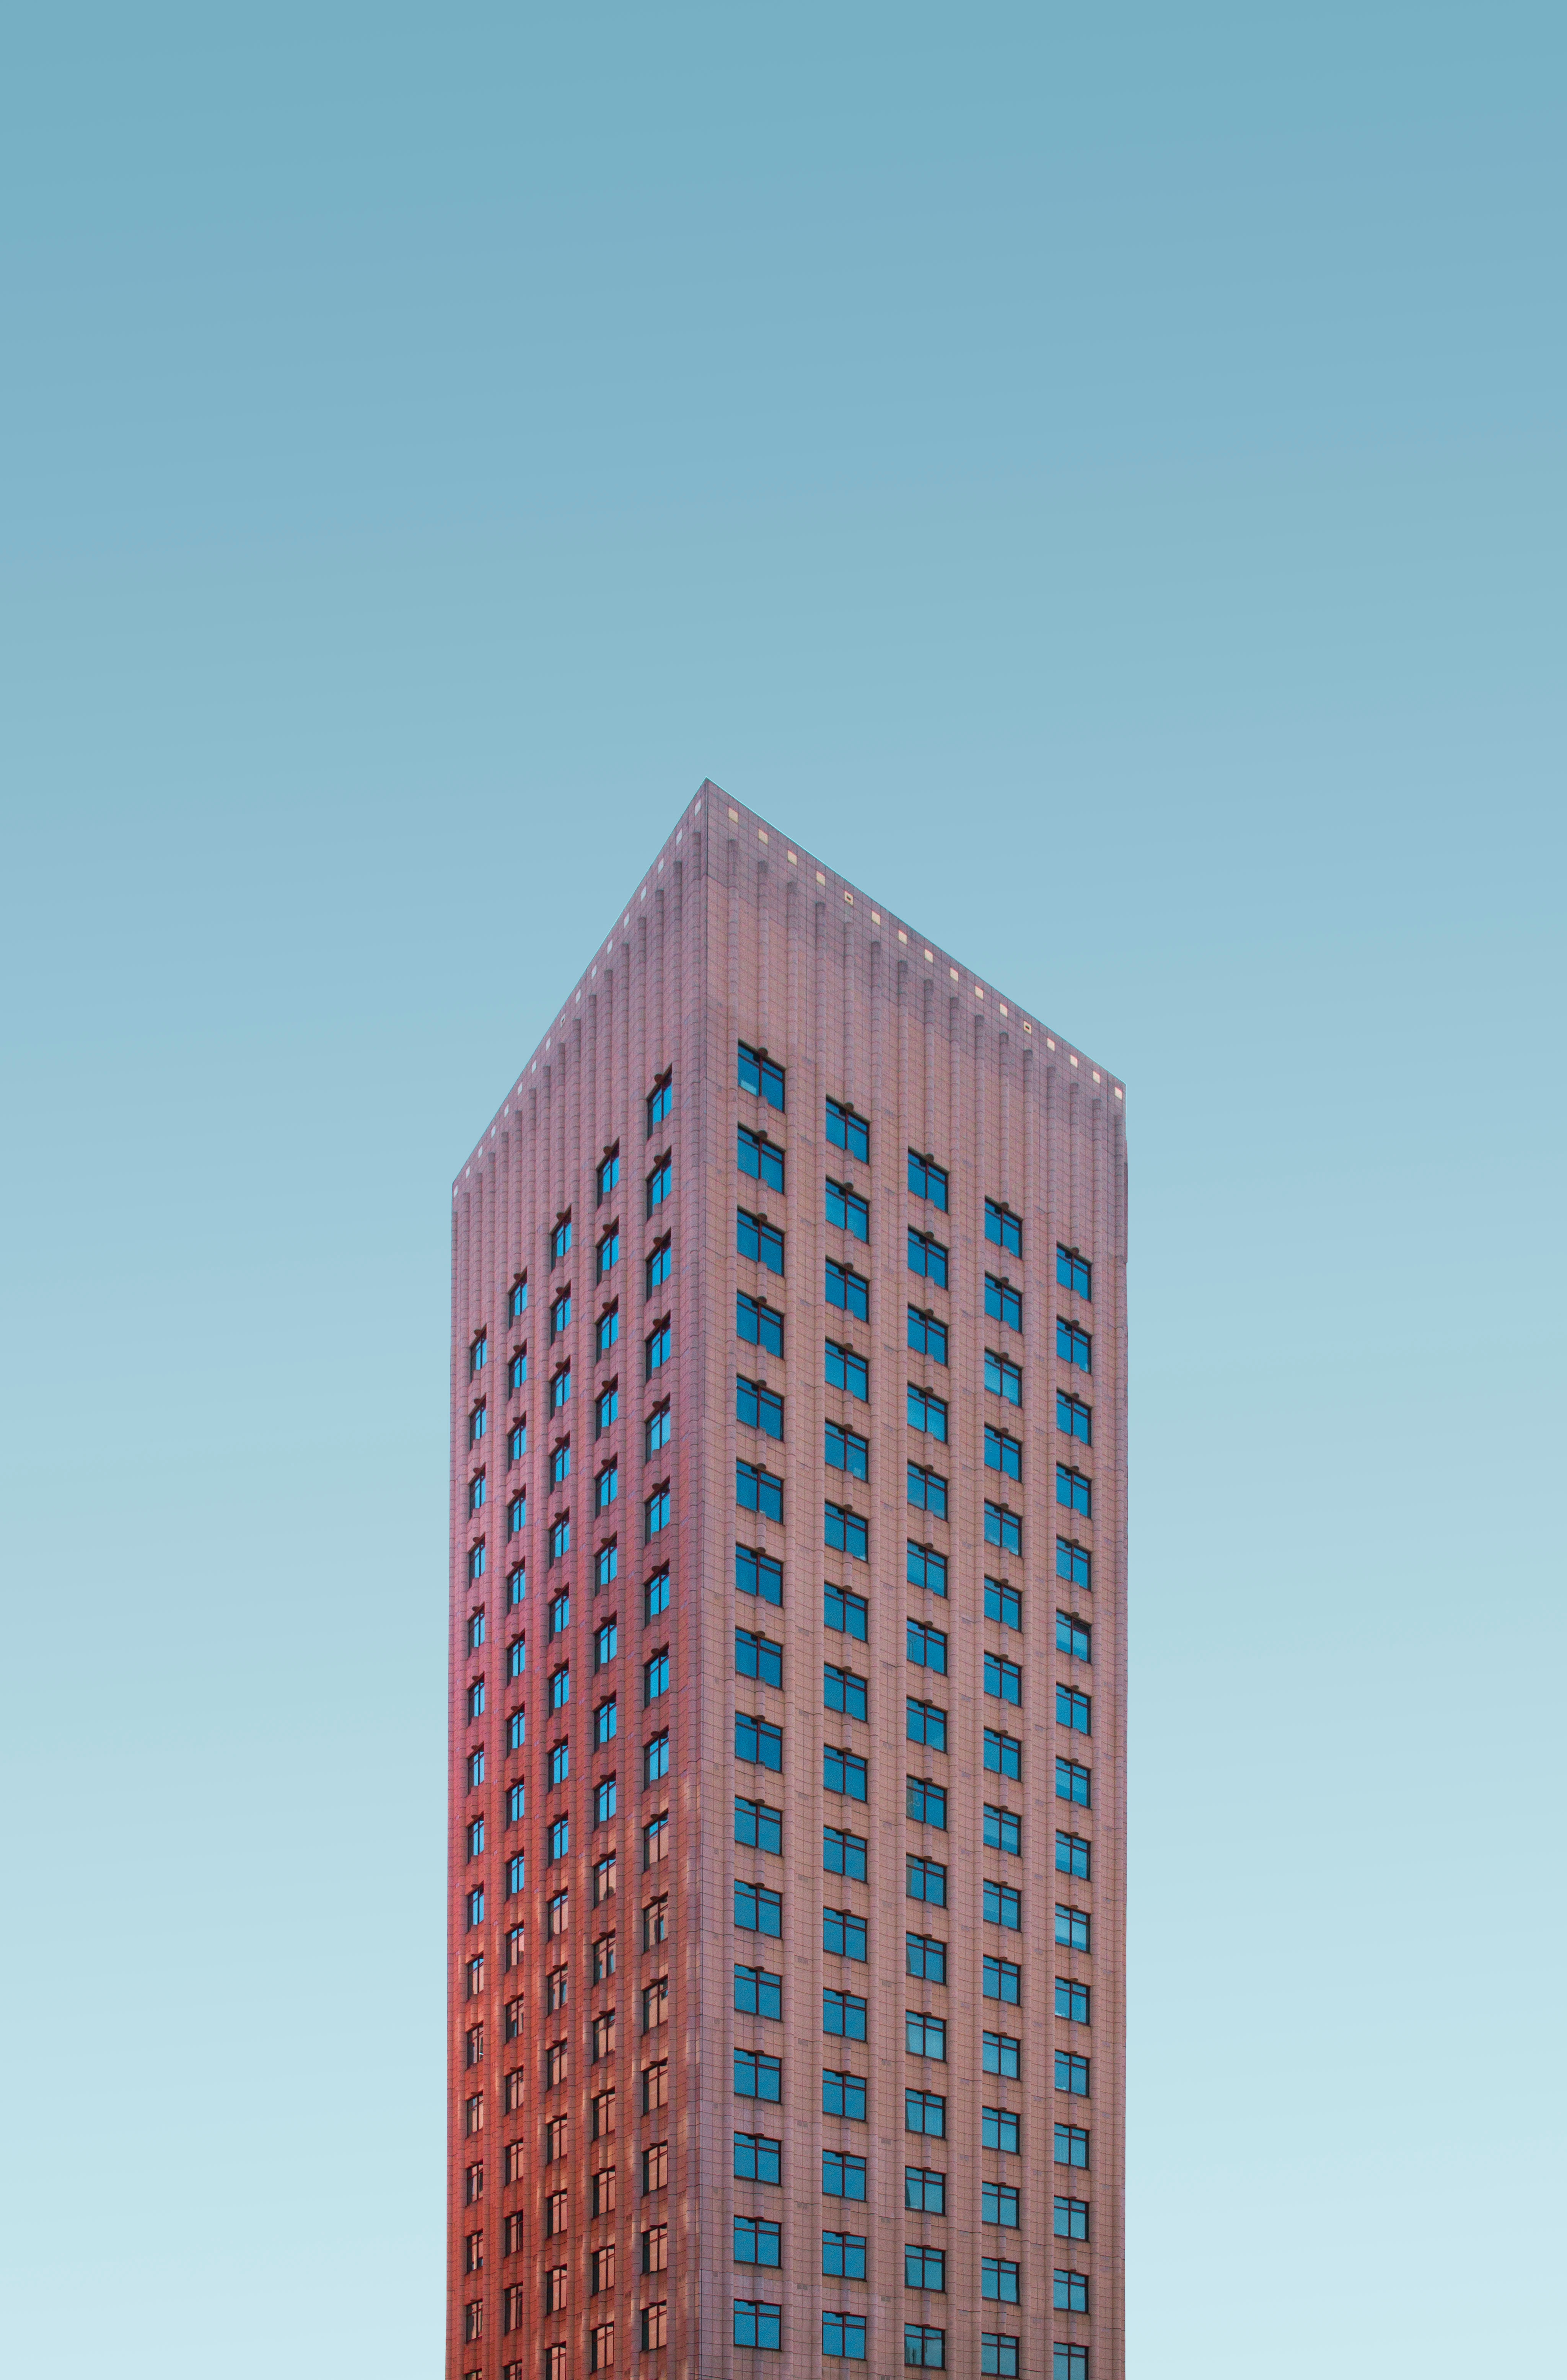 A building with slightly dull bg